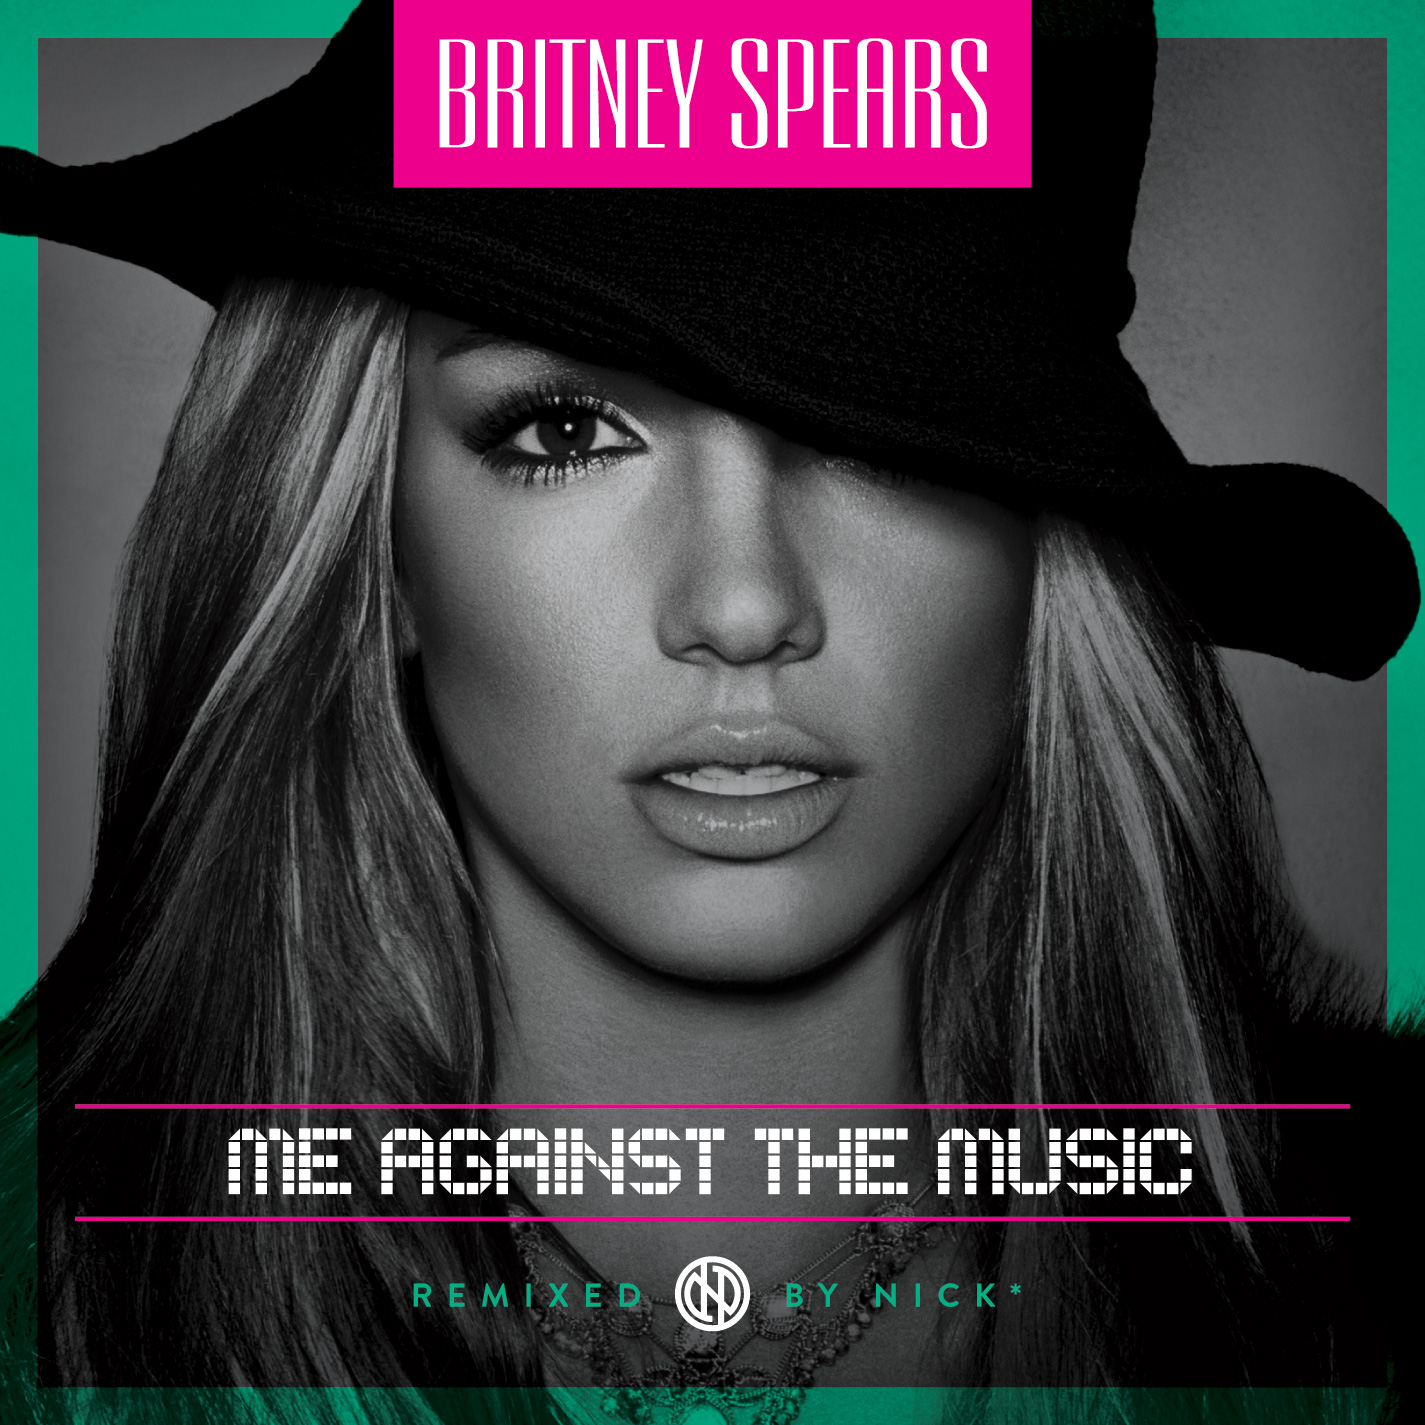 Britney Spears - Me Against The Music Nick* Remix